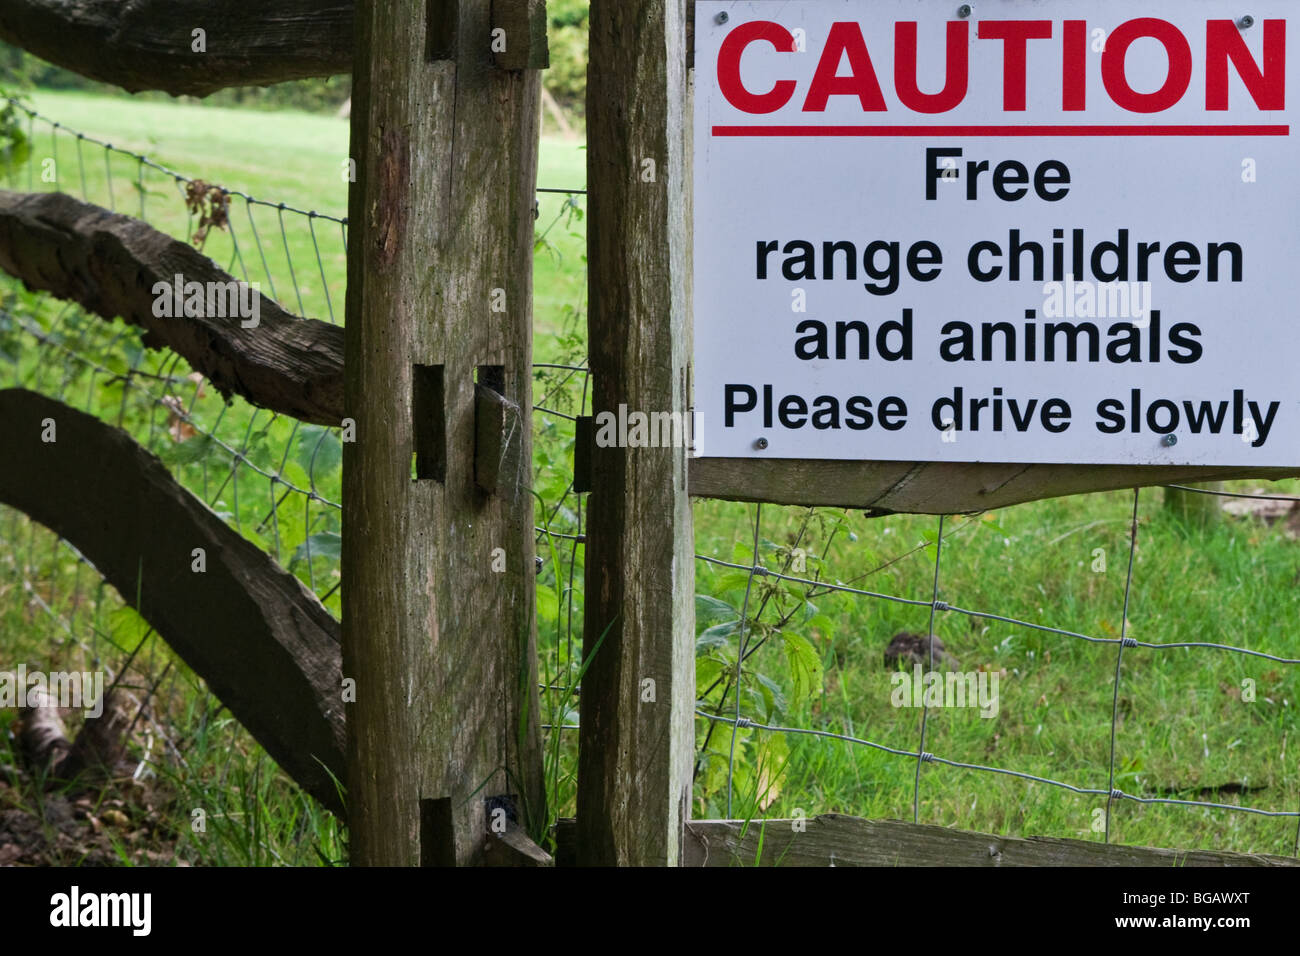 ROAD WARNING NOTICE ANY COLOUR SLOW FREE RANGE CHILDREN SIGN 